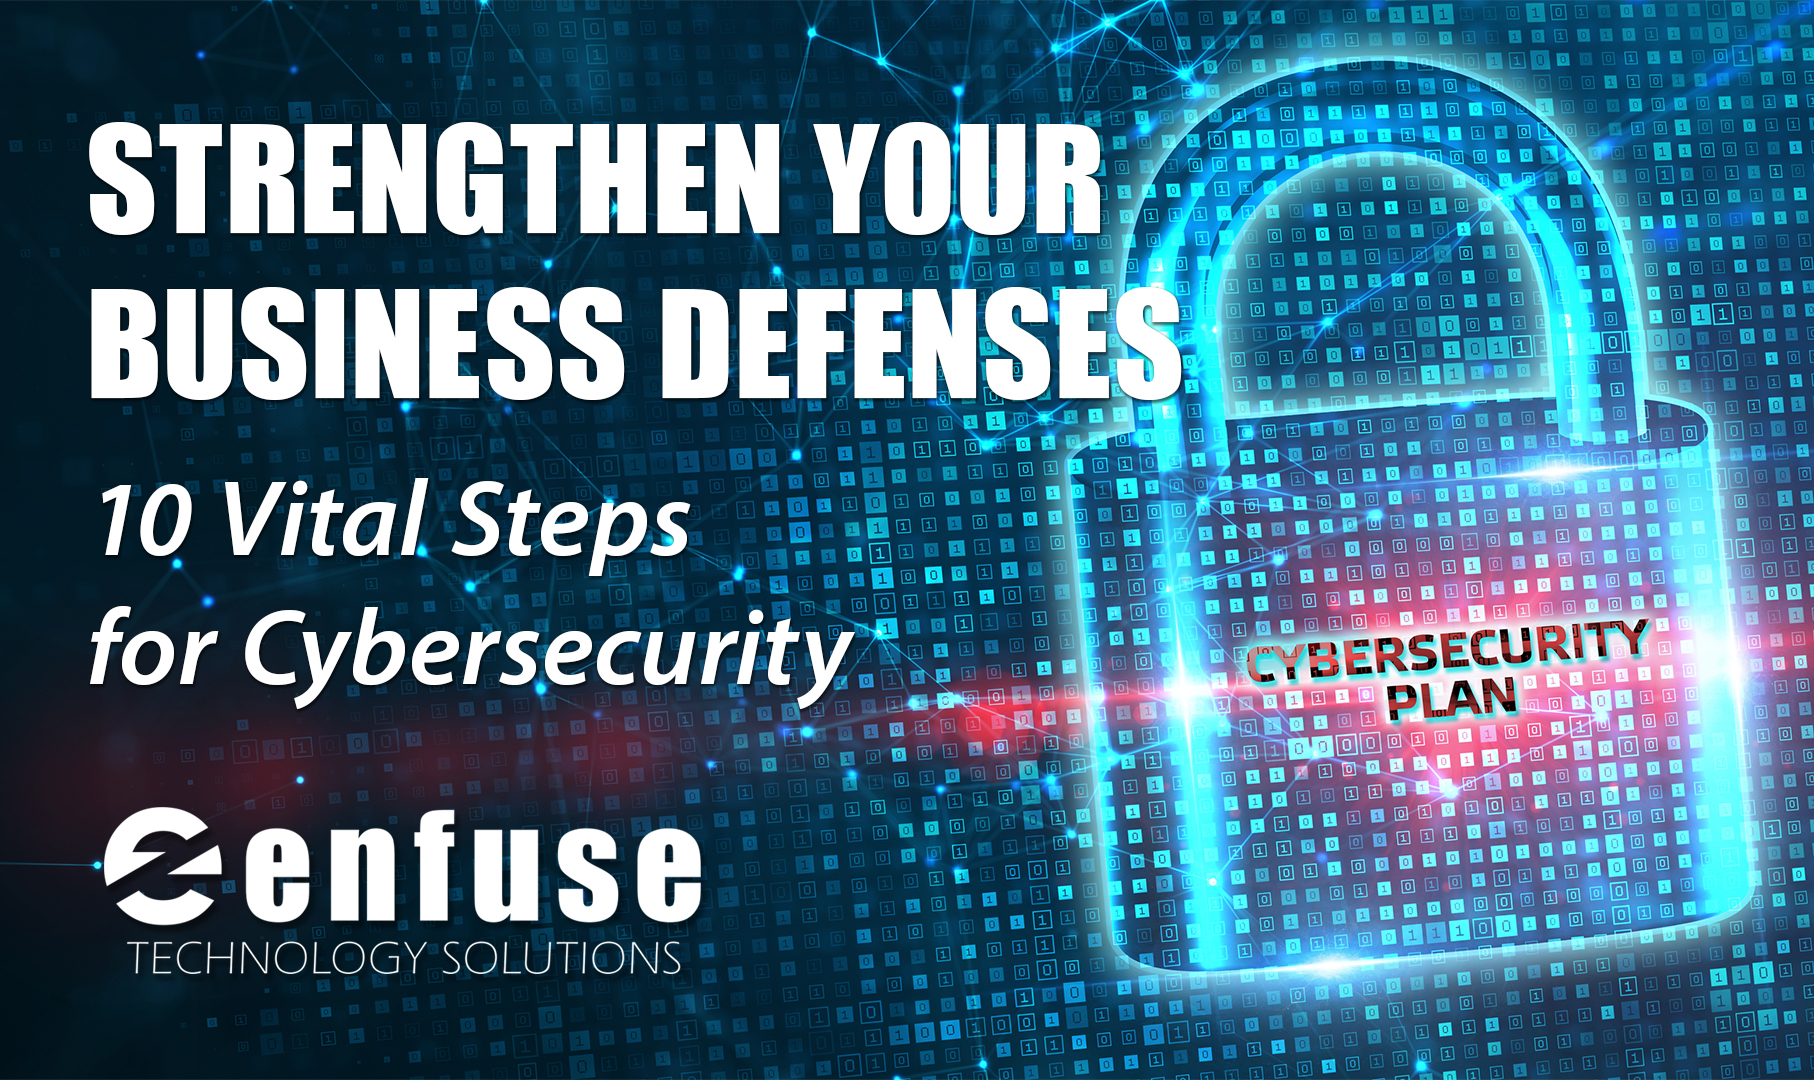 Strengthen Your Business Defenses: 10 Vital Steps for Cybersecurity